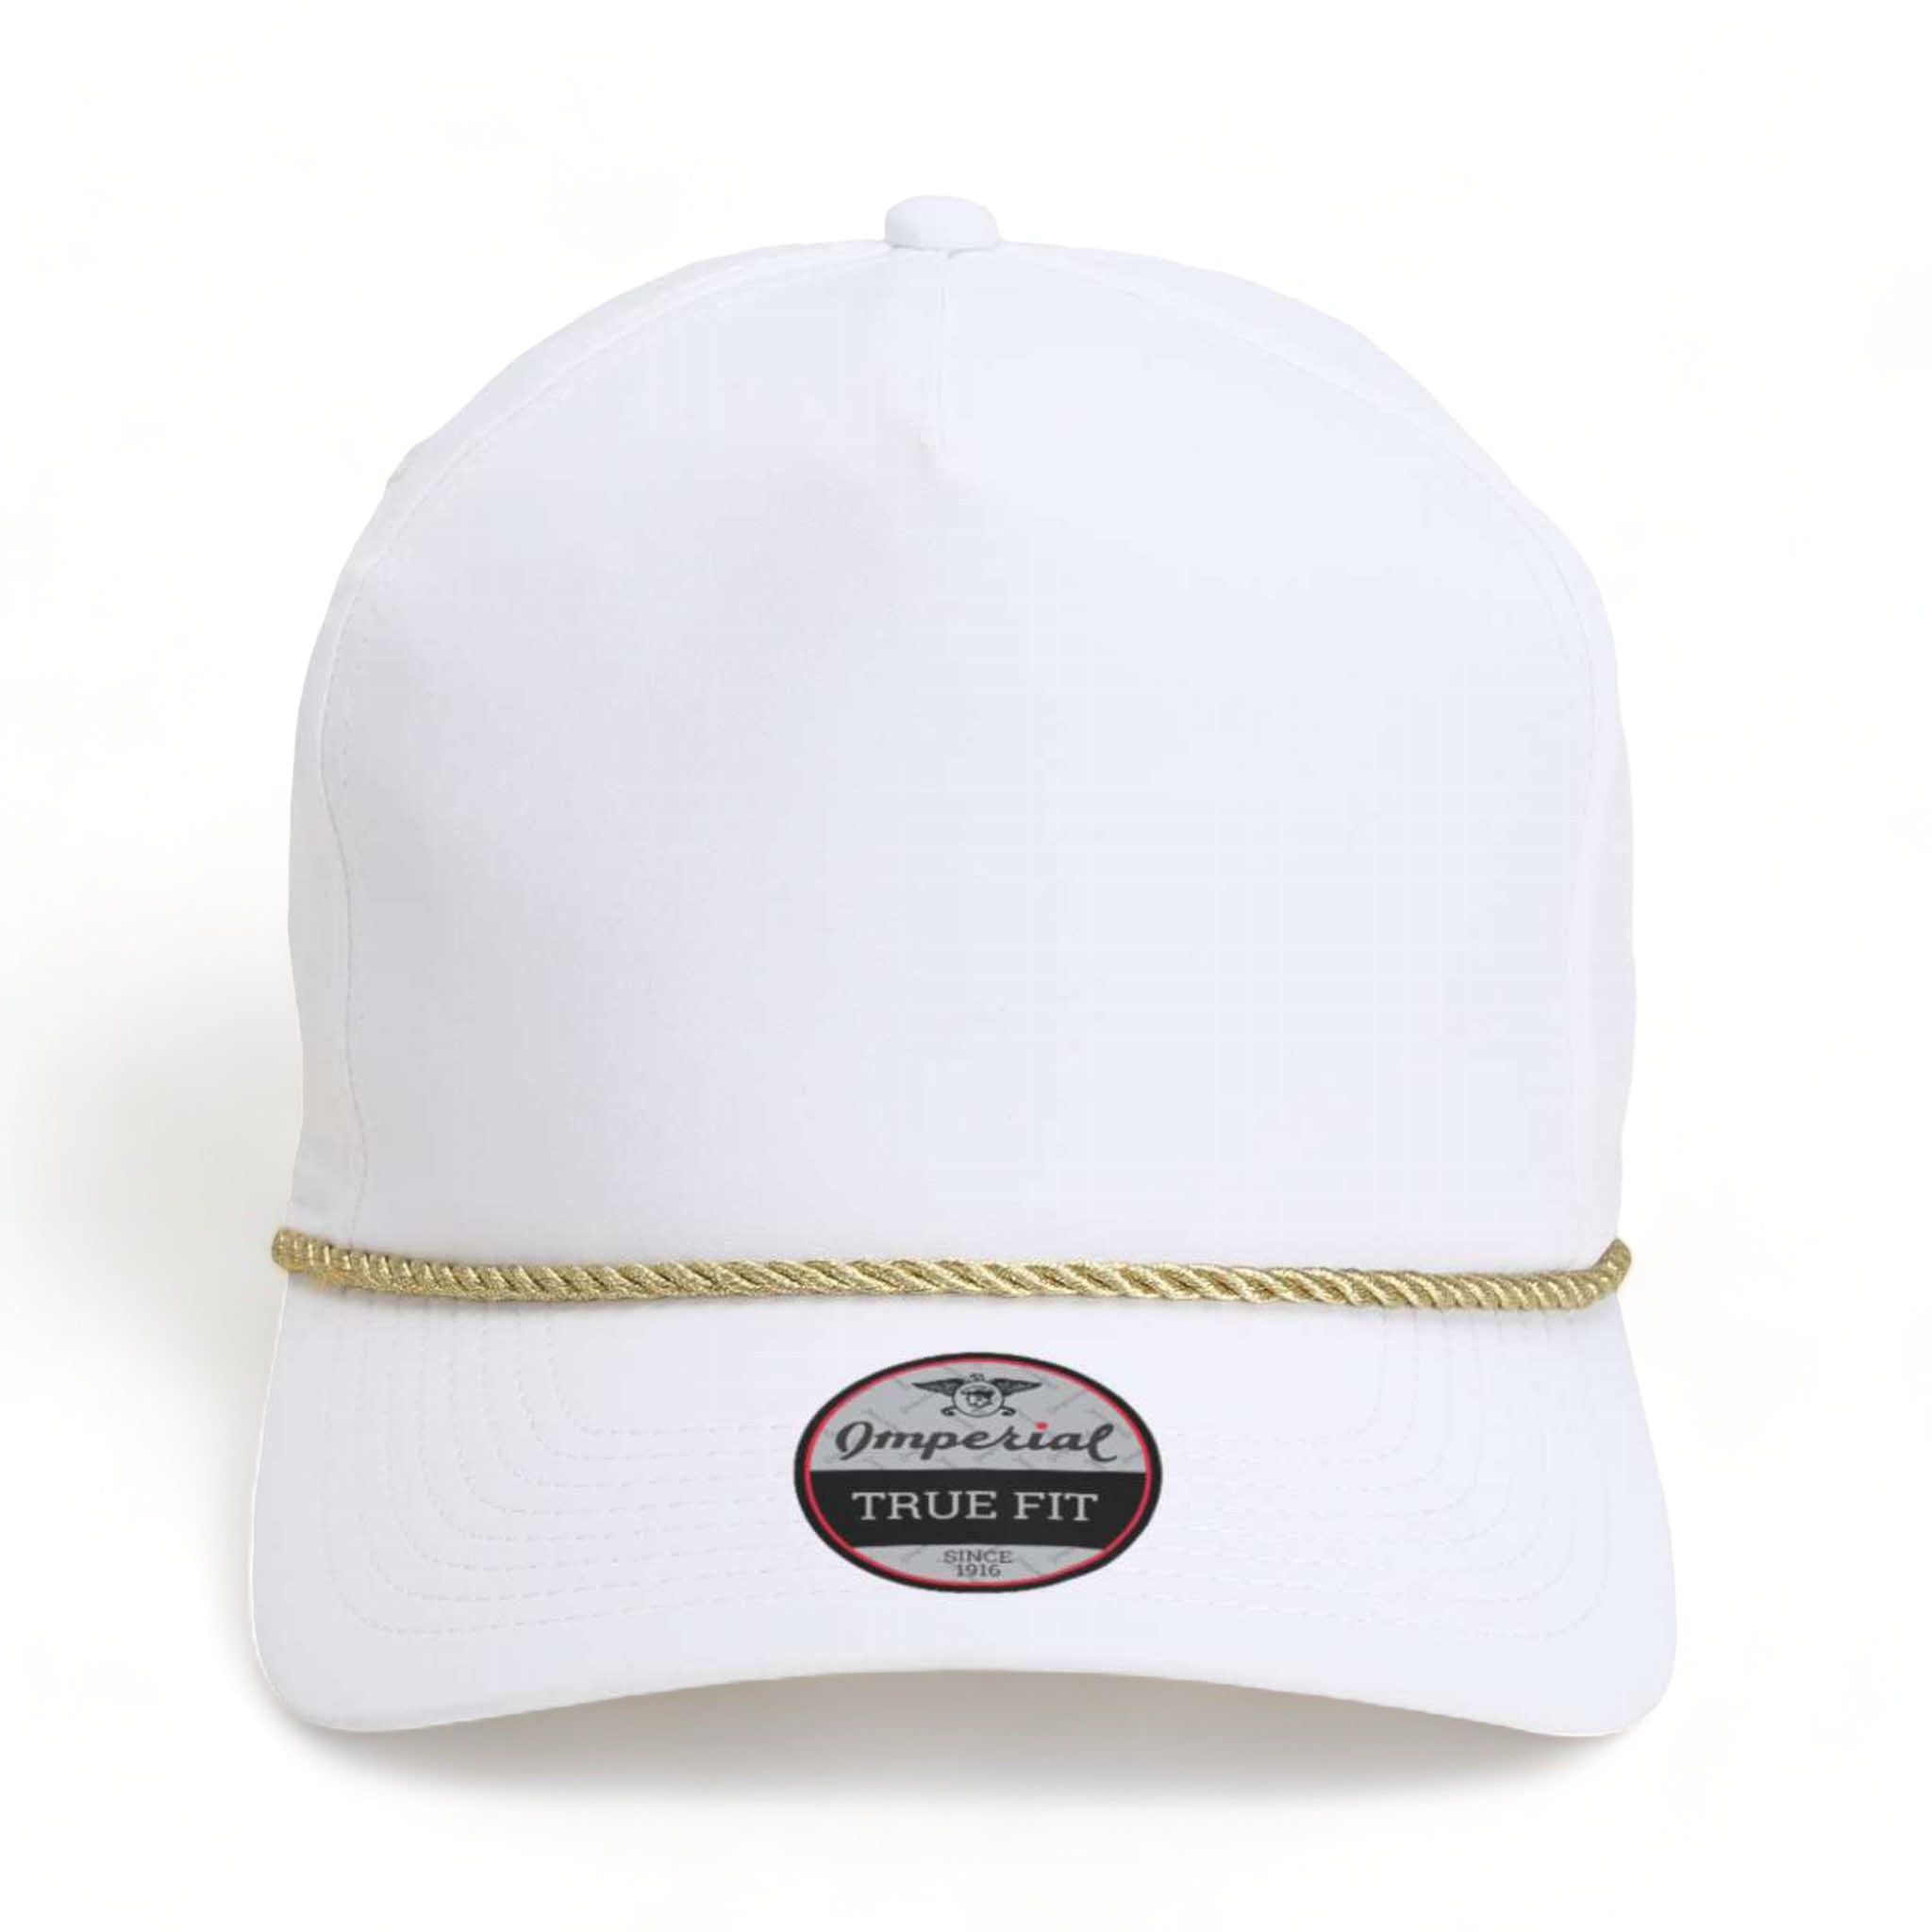 Front view of Imperial 5054 custom hat in white and metallic gold